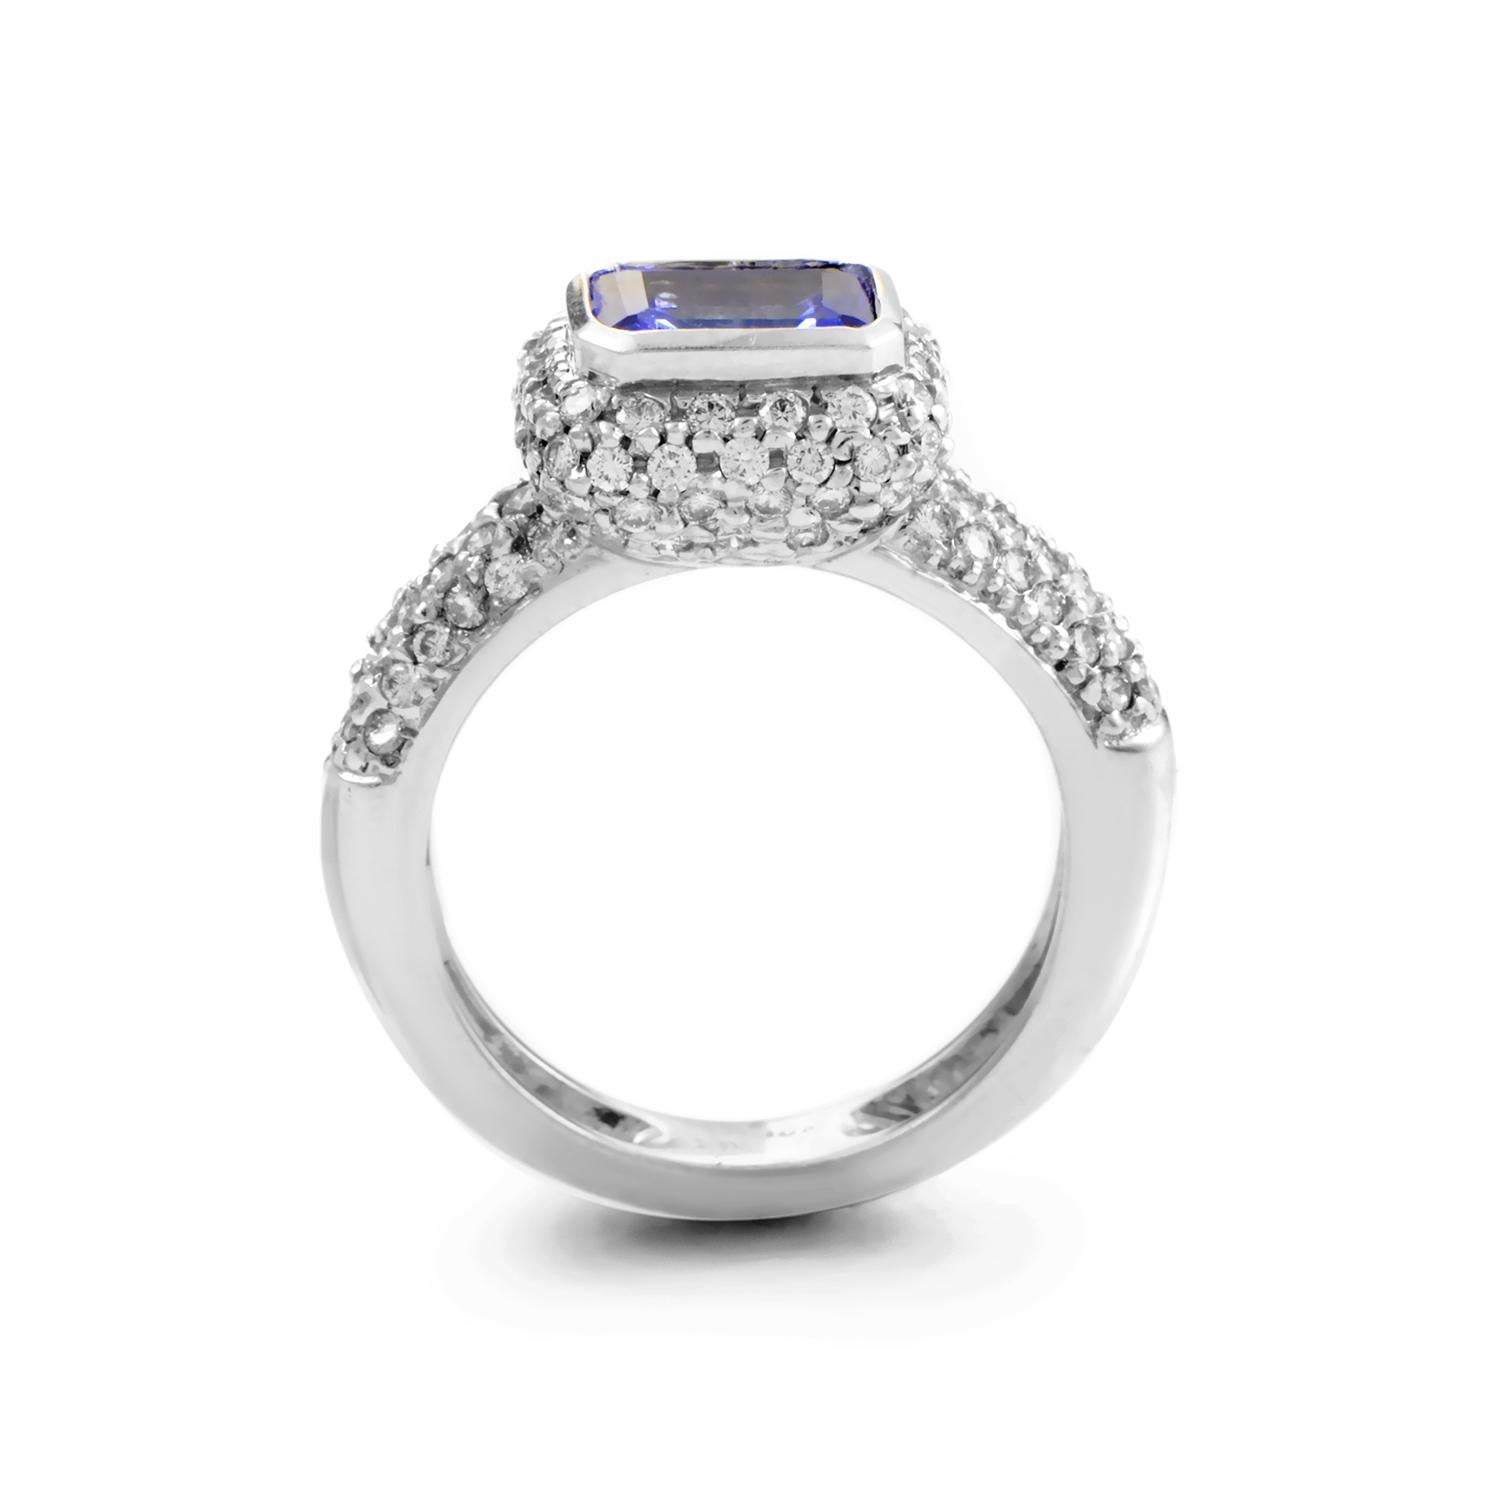 An exceptional design by Barry Kronen, this marvelous ring boasts the prestigious combination of elegant 18K white gold and magnificent blue tanzanite stone weighing 1.05 carats; the glamorous beauty of the ring is enhanced by the sparkle of